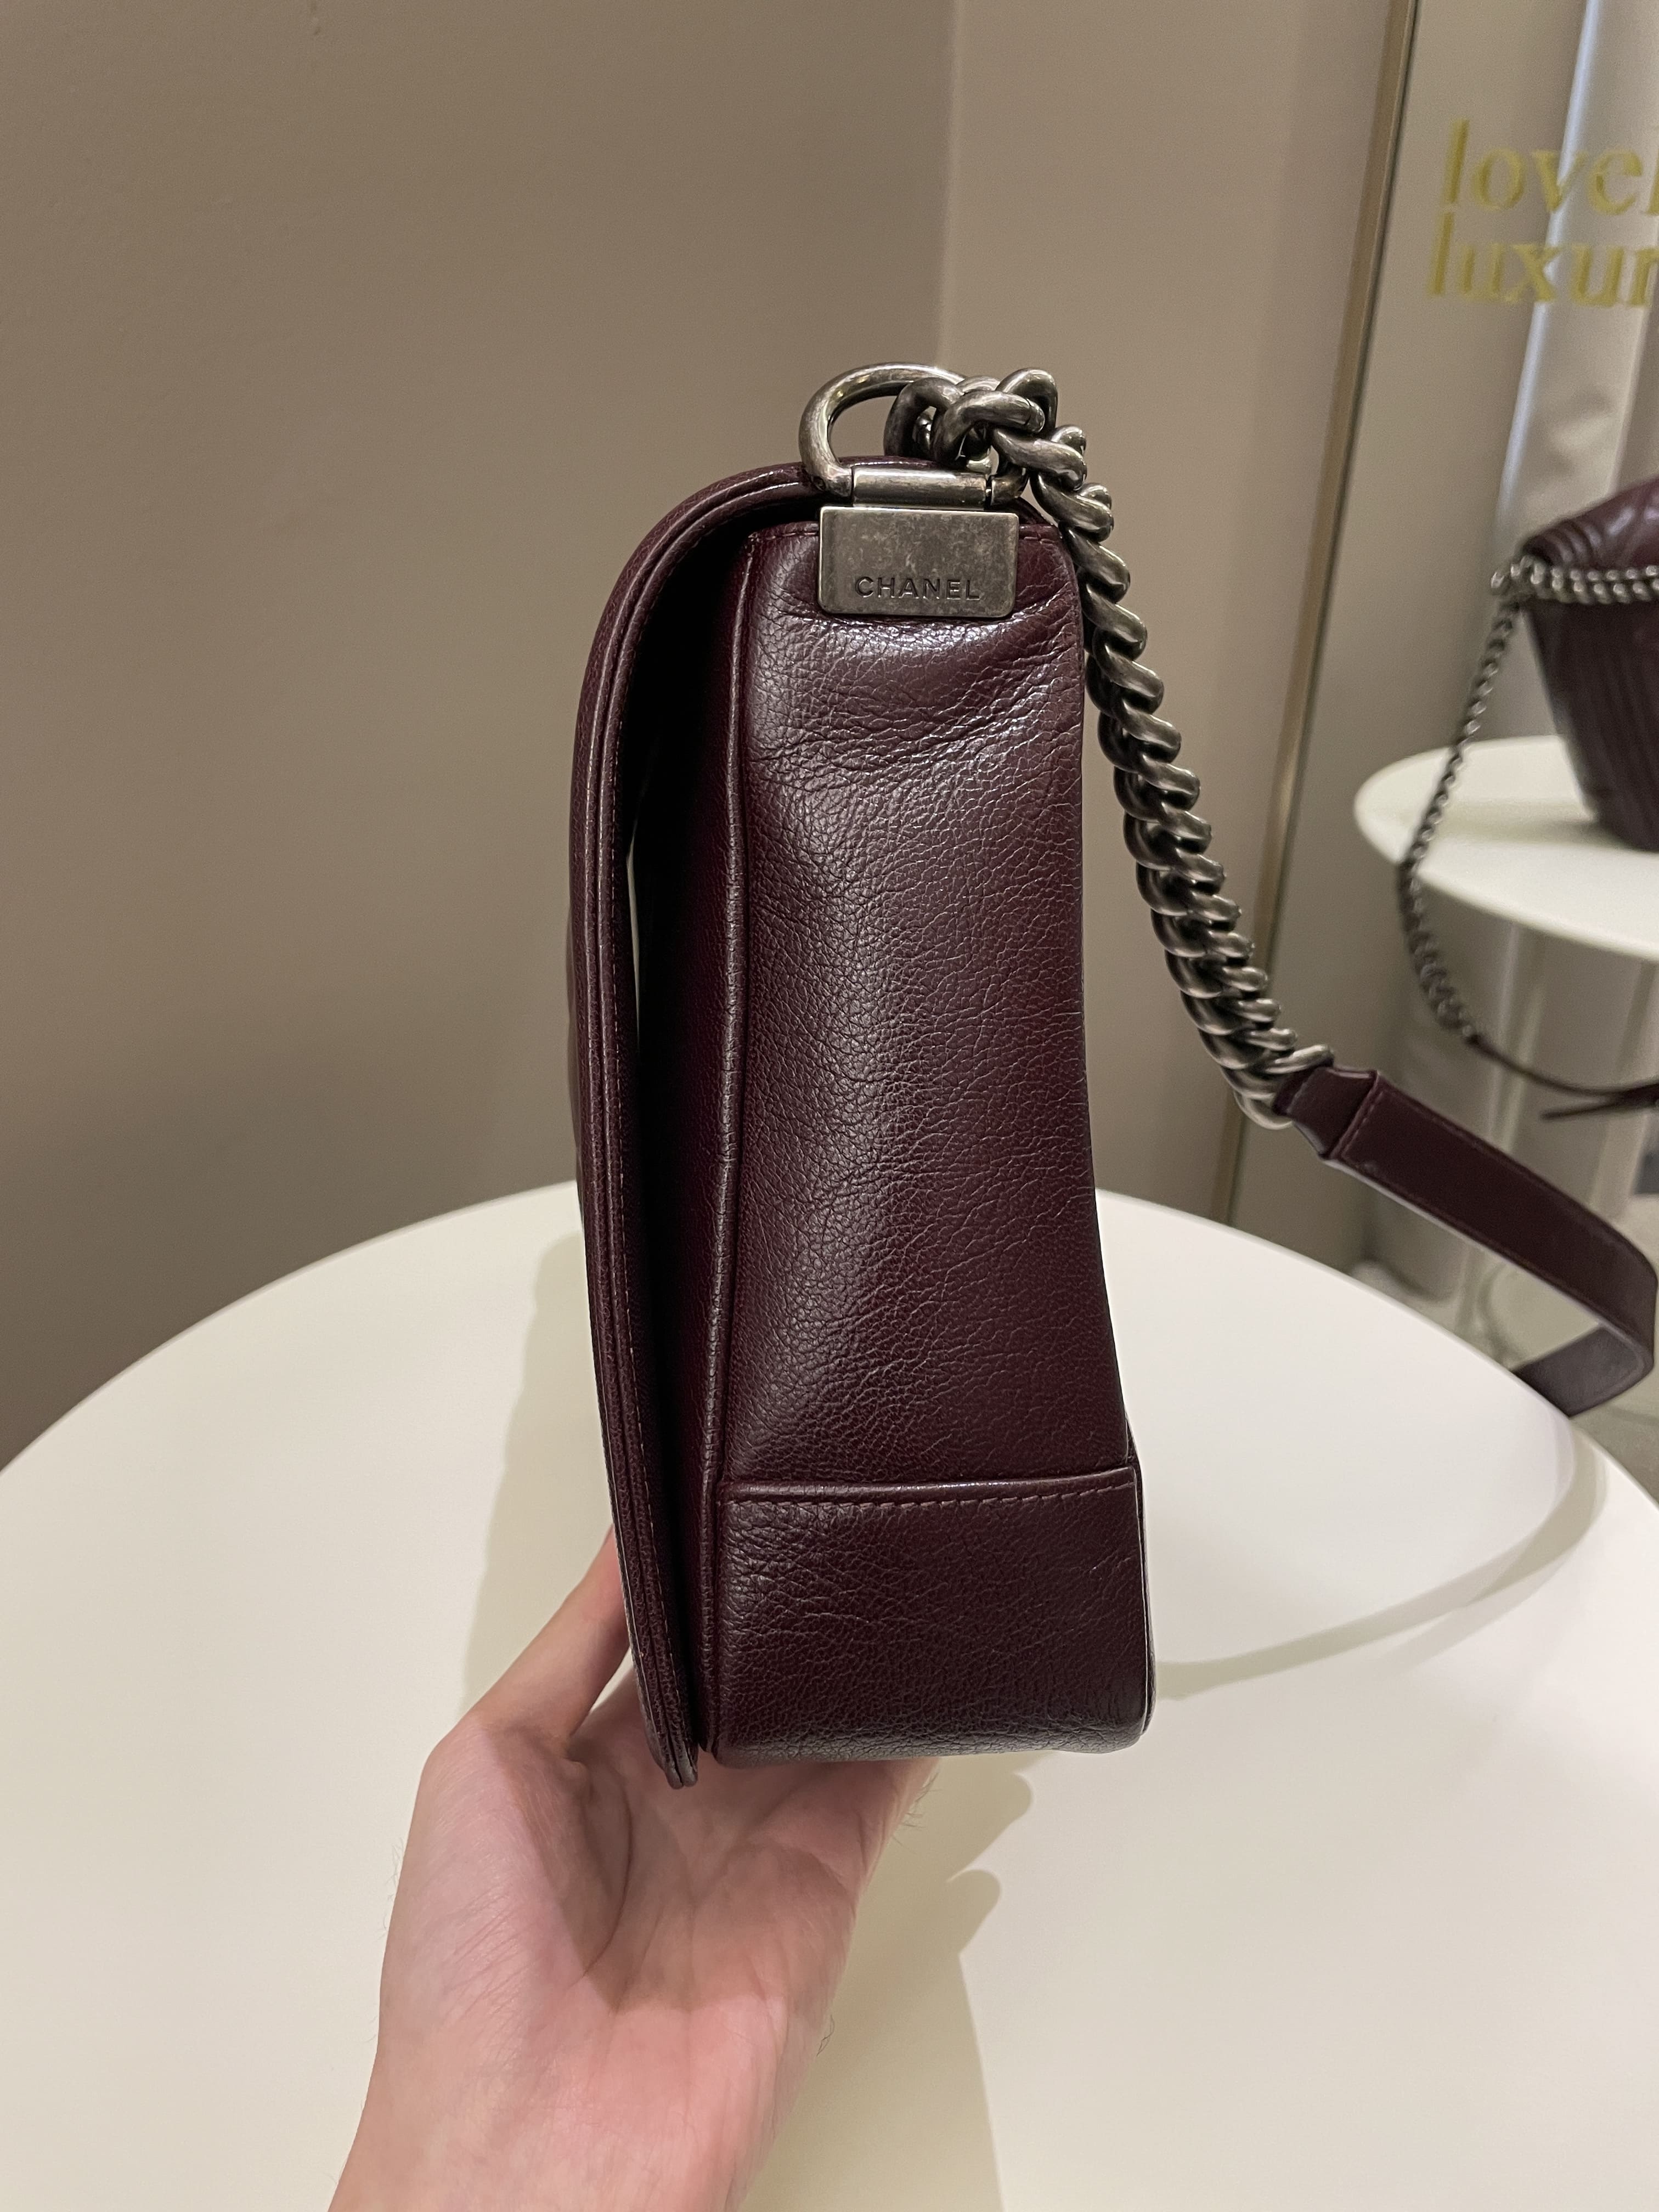 Deaville Burgundy Colour Tote bag in Grained Calfskin and gold-tone metal.  Chanel 2019 - 2020., Handbags and Accessories Online, Ecommerce Retail